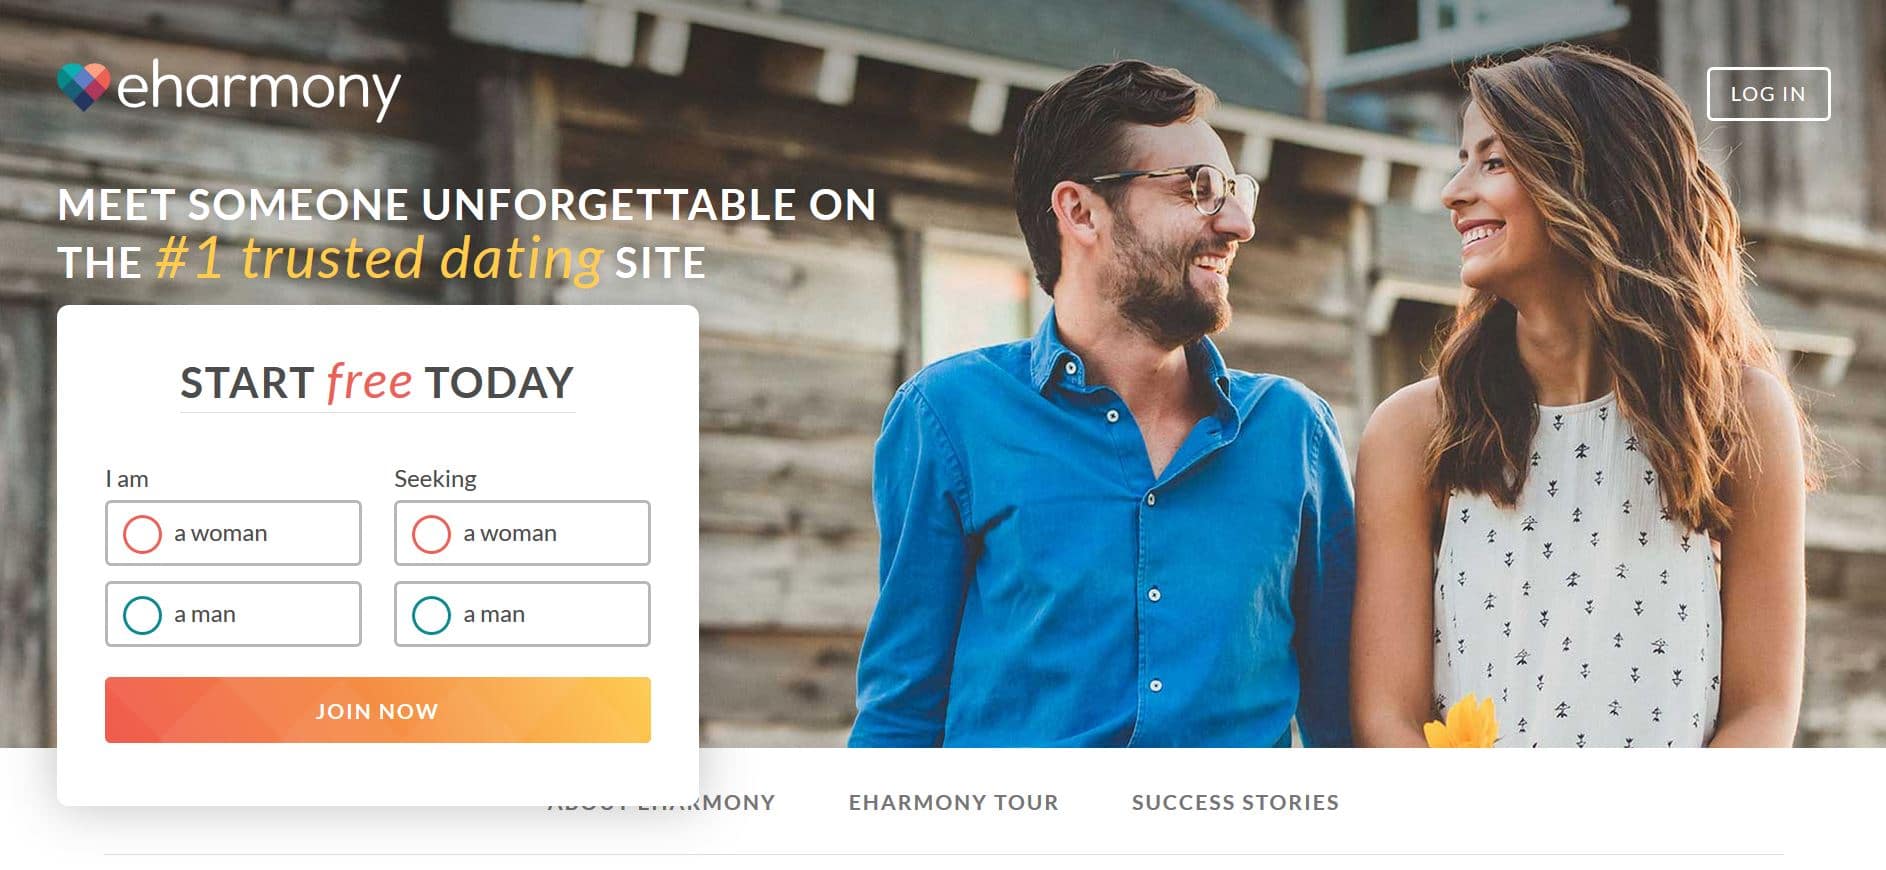 10 Best Christian Dating Sites – Find Someone With Your Values